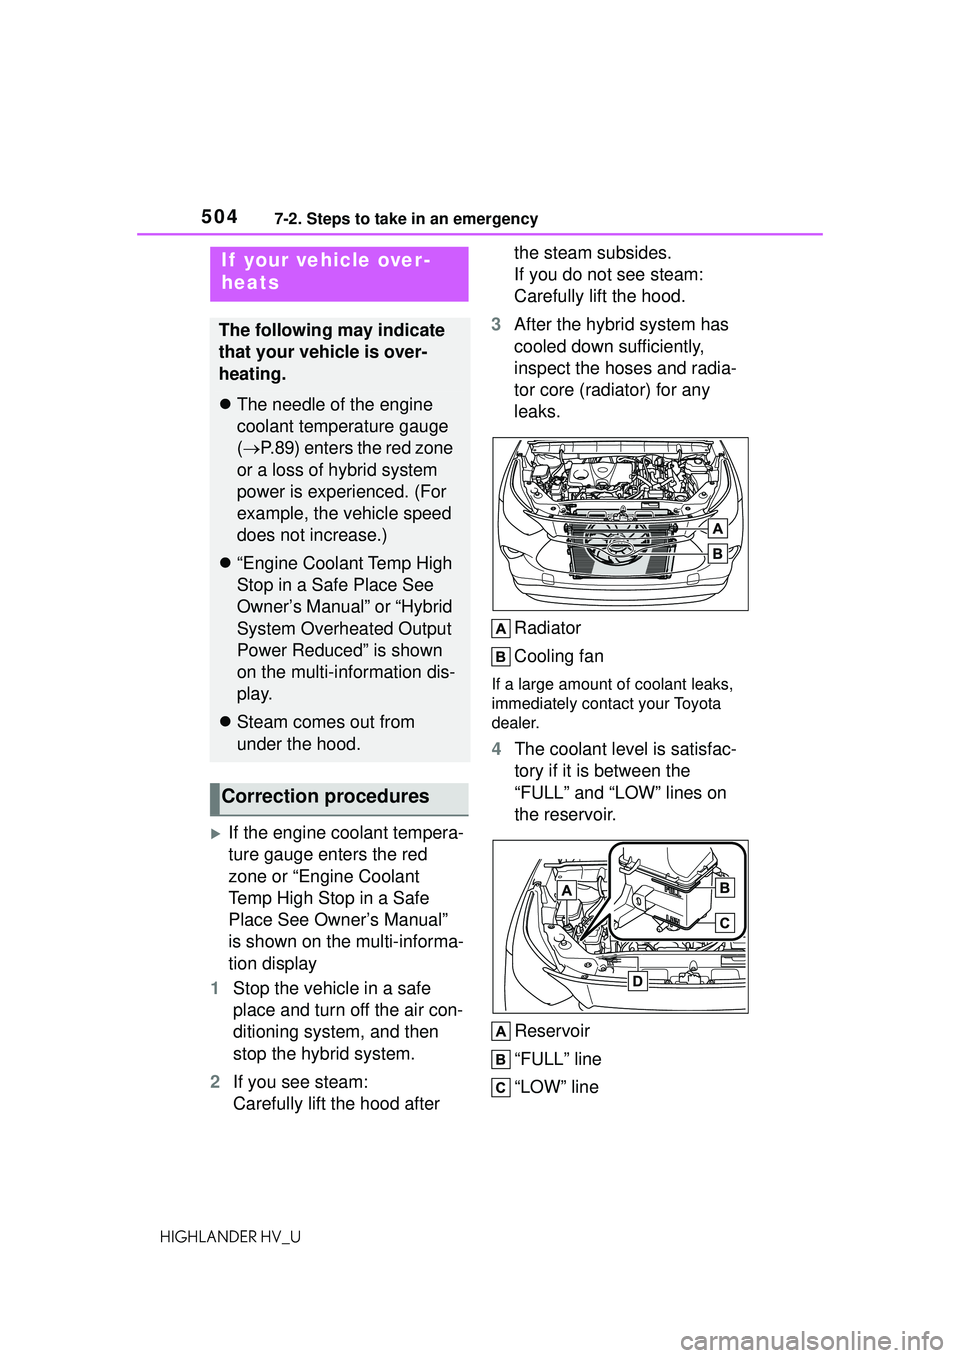 TOYOTA HIGHLANDER HYBRID 2021  Owners Manual (in English) 5047-2. Steps to take in an emergency
HIGHLANDER HV_U
If the engine coolant tempera-
ture gauge enters the red 
zone or “Engine Coolant 
Temp High Stop in a Safe 
Place See Owner’s Manual” 
i